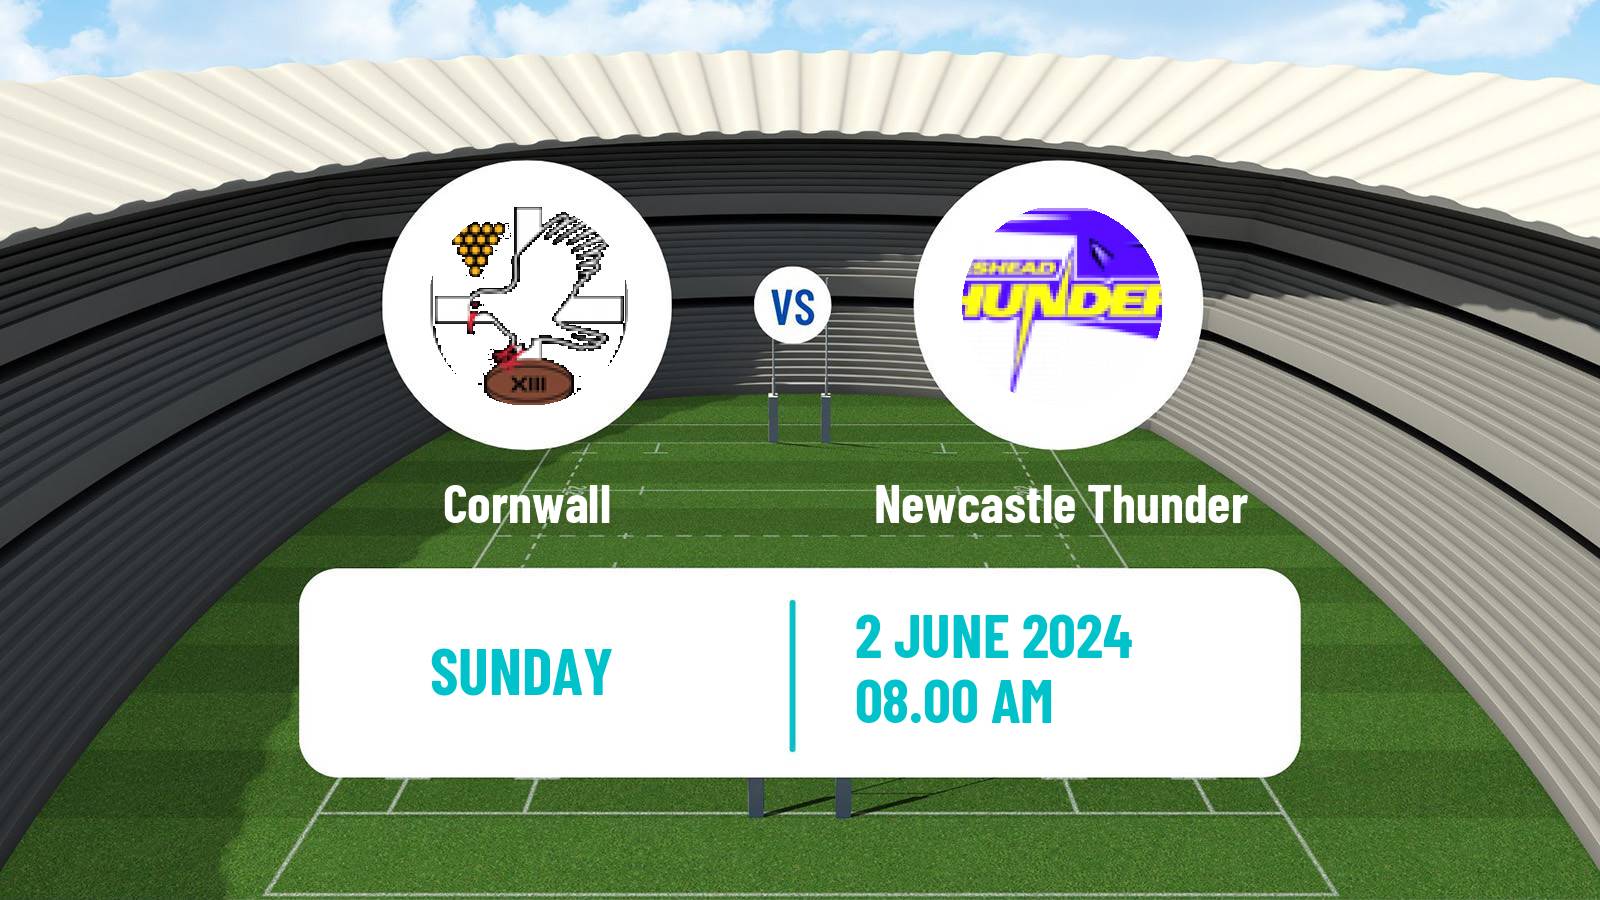 Rugby league English League 1 Rugby League Cornwall - Newcastle Thunder